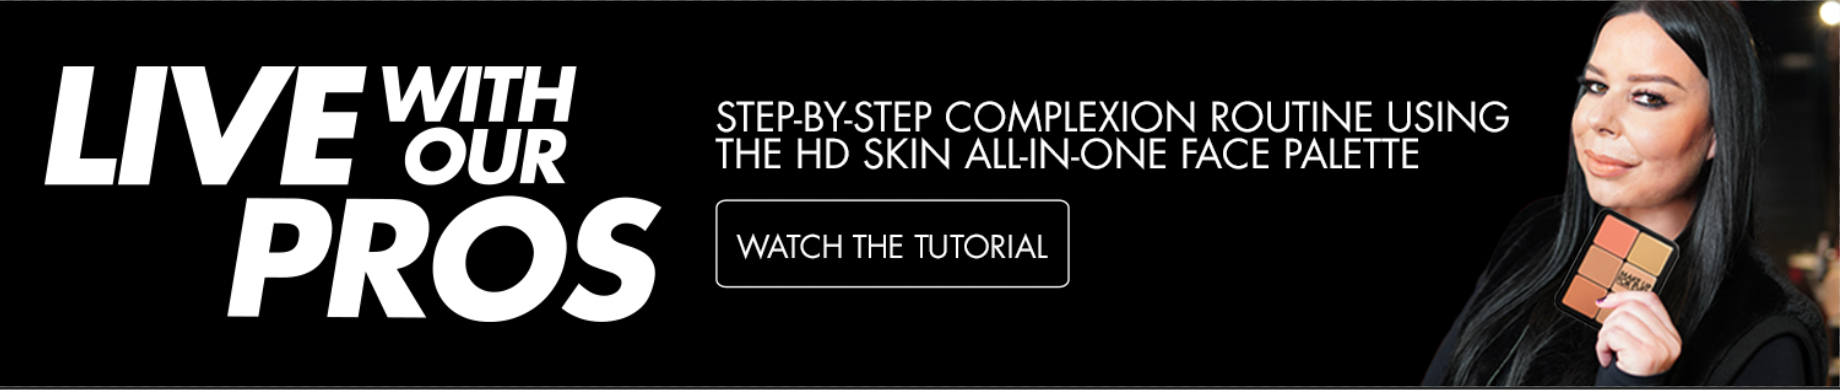 STEP-BY-STEP COMPLEXION ROUTINE USING ONE PALETTE. WATCH THE TUTORIAL